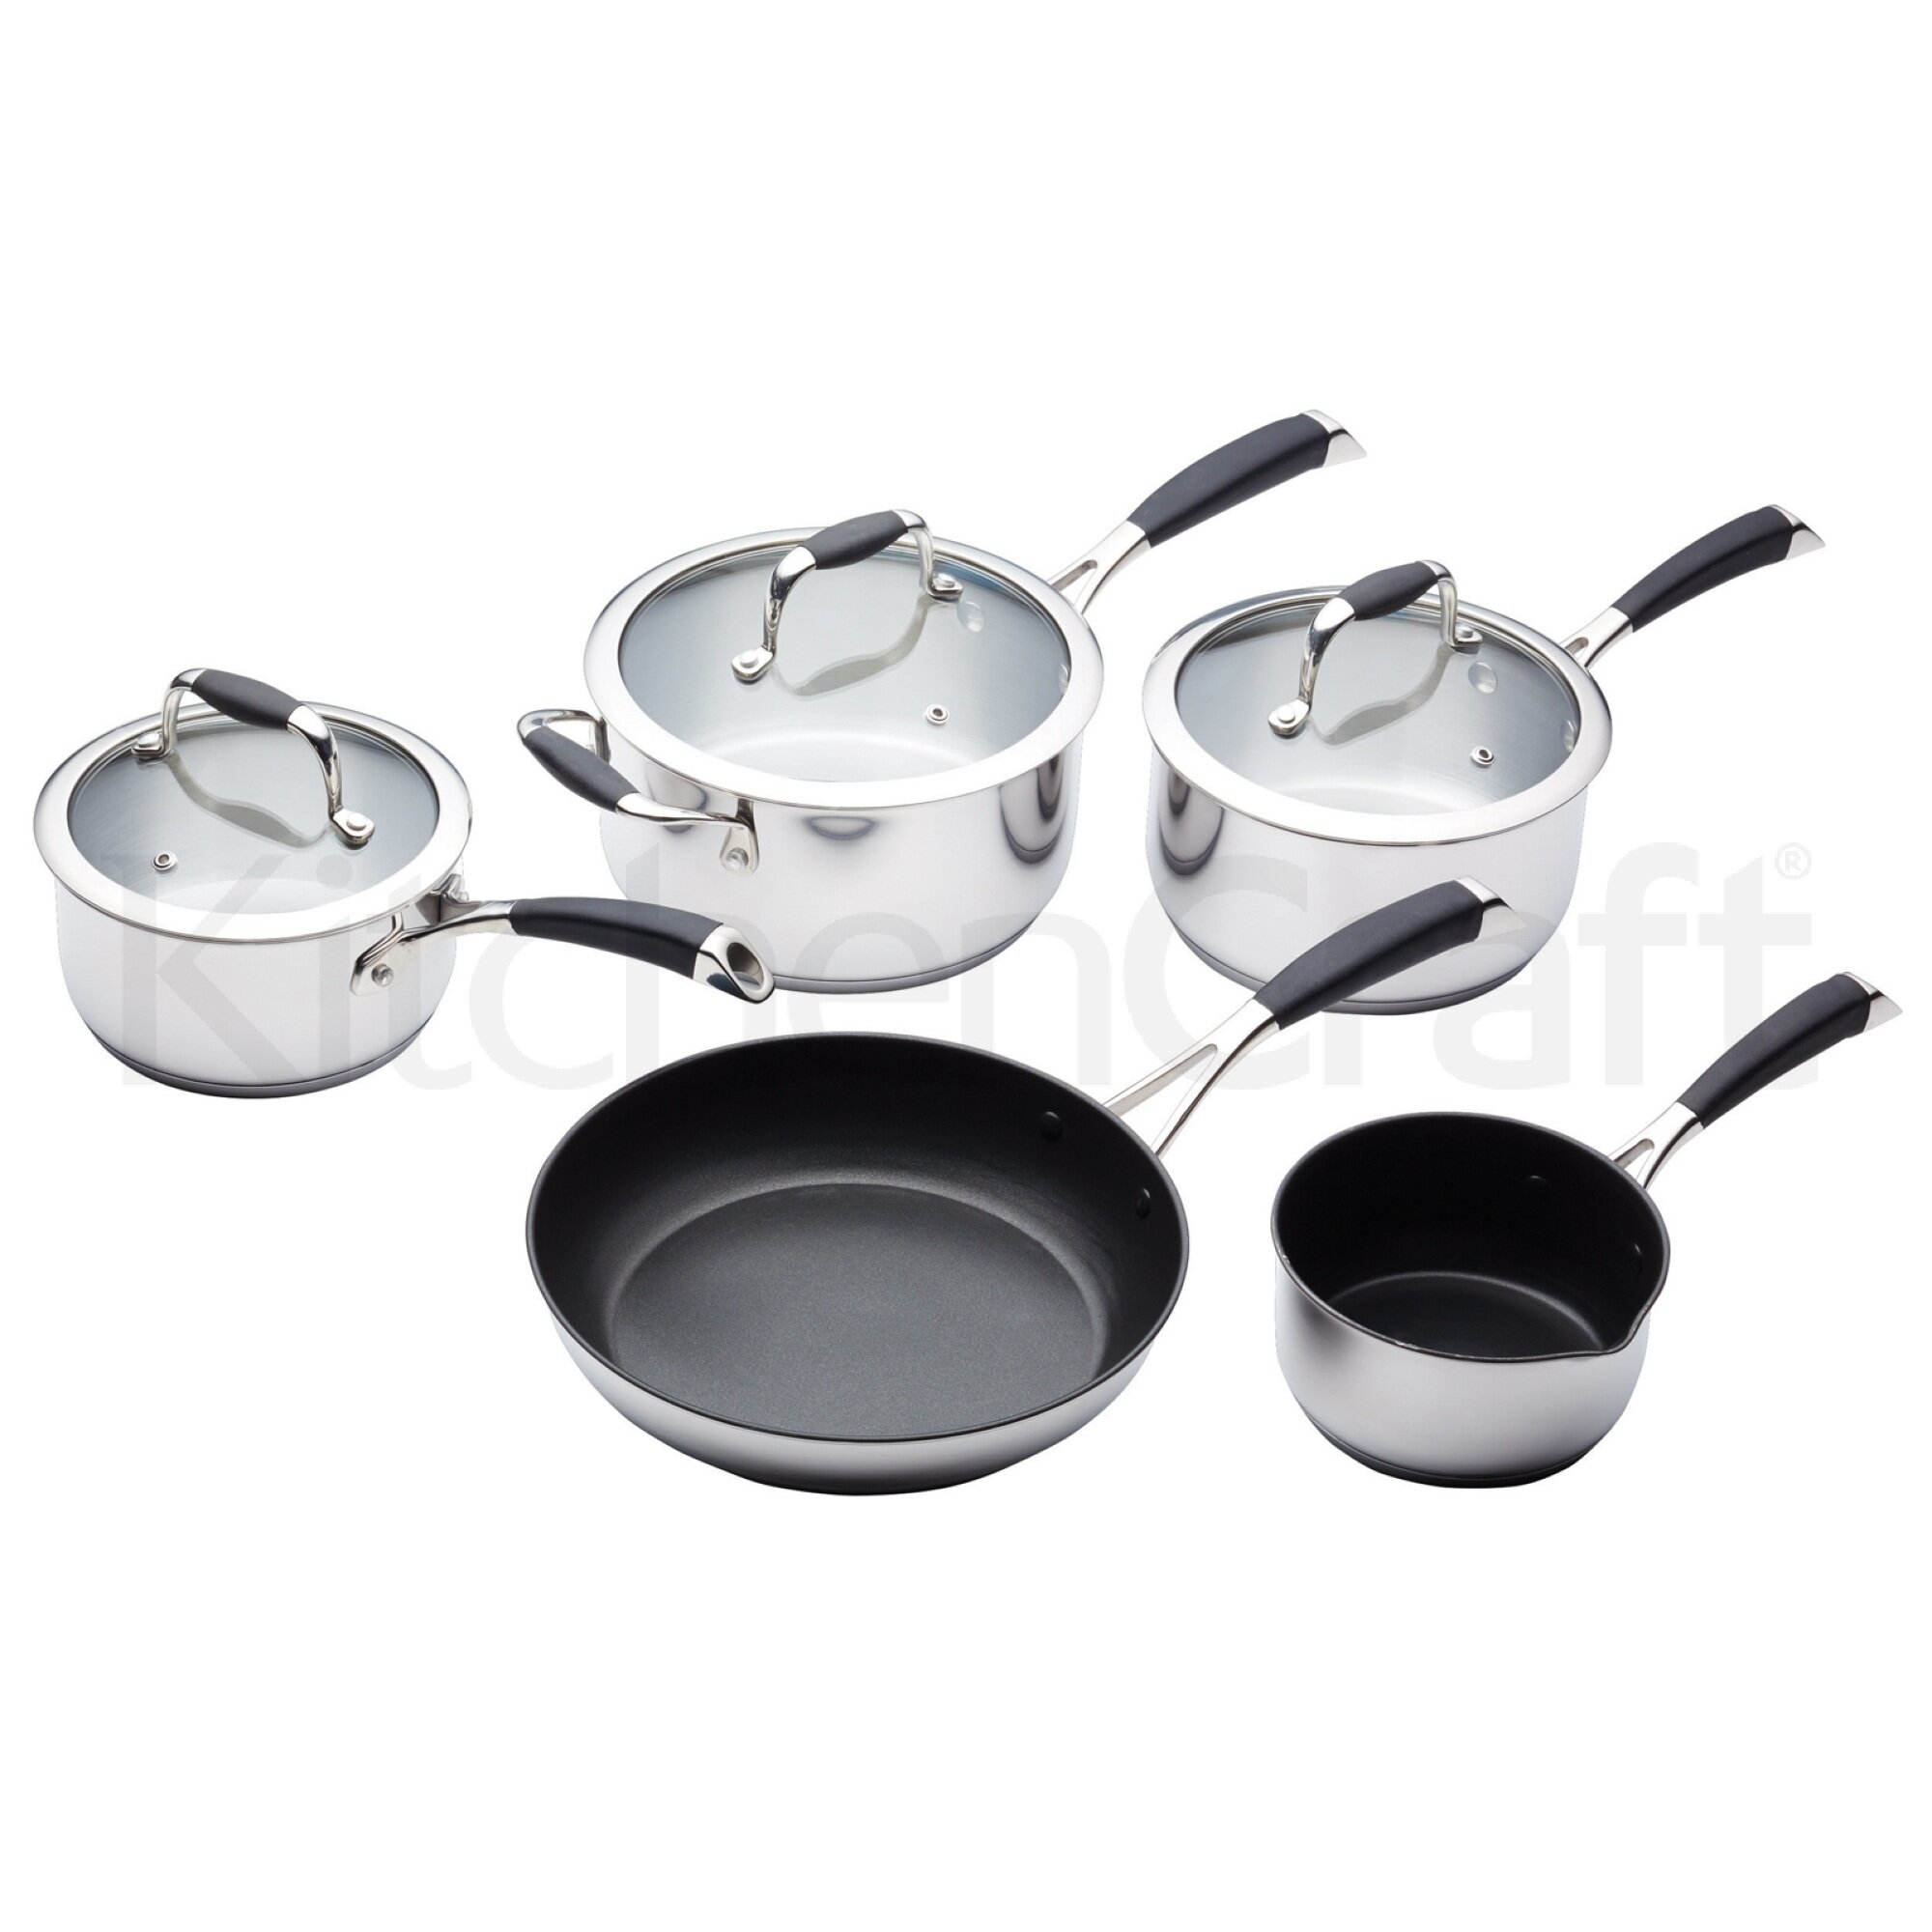 Kitchen Craft Deluxe 5 Piece Non Stick Stainless Steel Cookware Set 